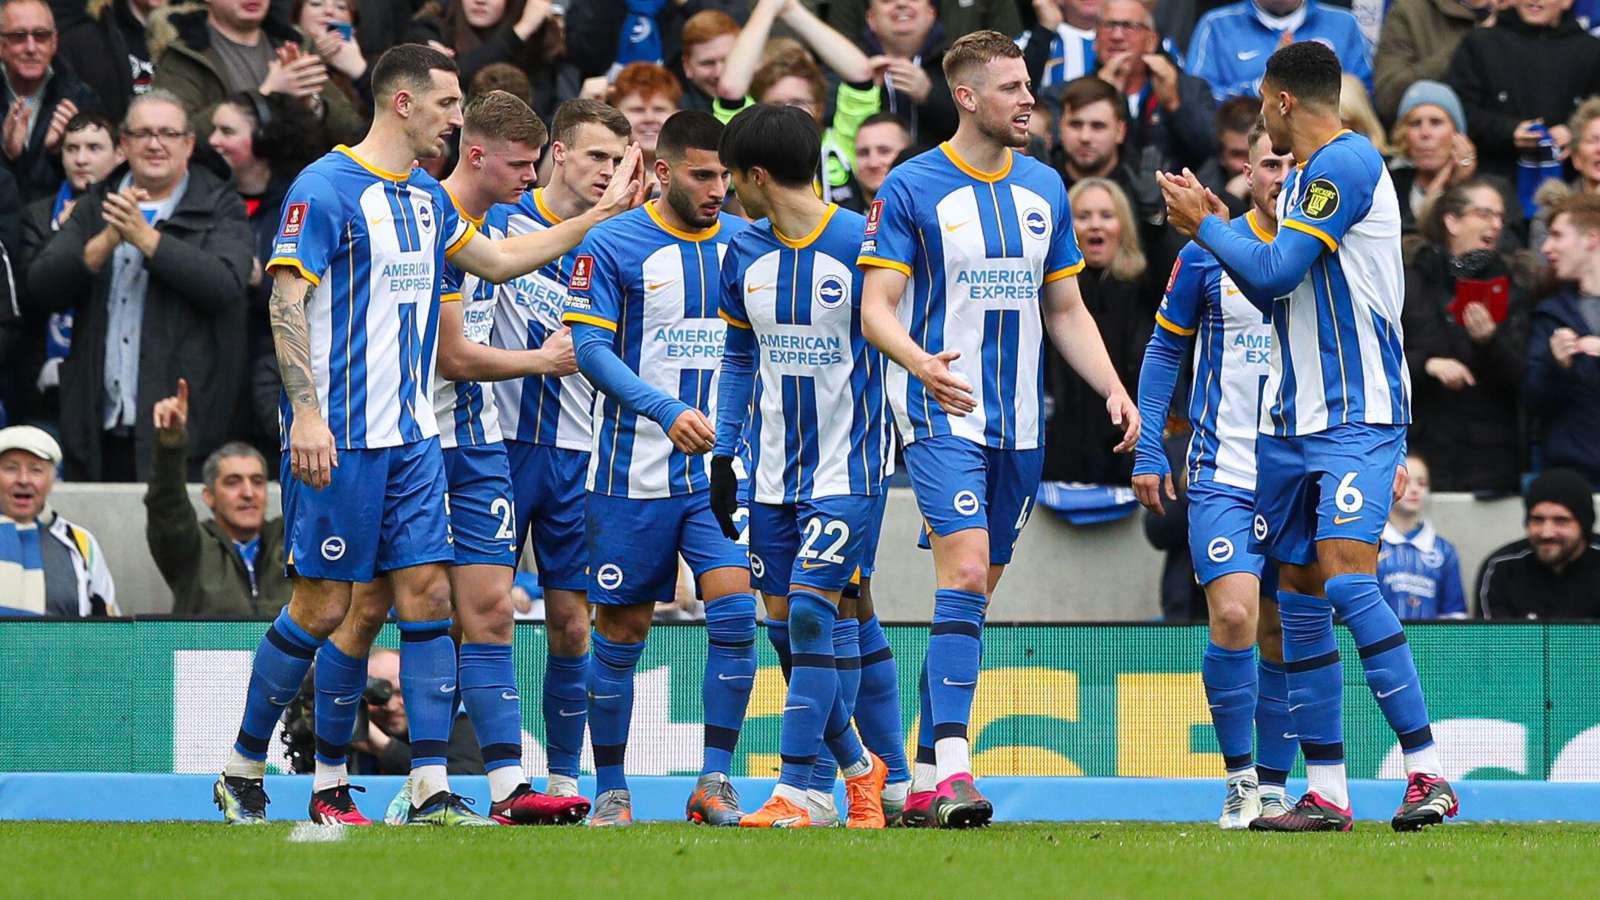 Brighton FC's Breakout Season: How They Are Setting the Bar for Mid-Tier EPL Teams